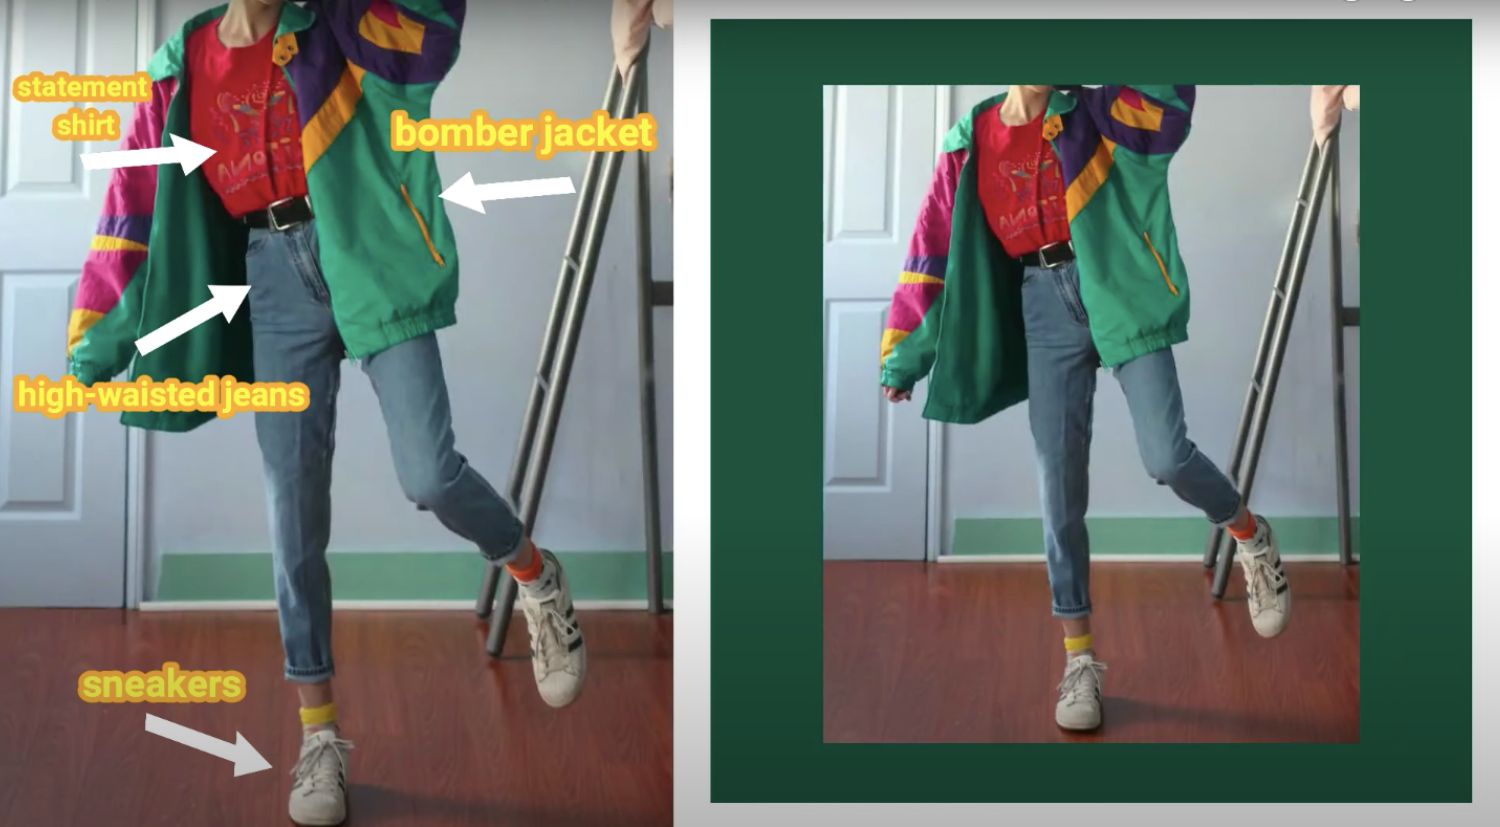 90s outfit of Statement Shirt, Bomber Jacket, High Waist Jeans, Sneakers